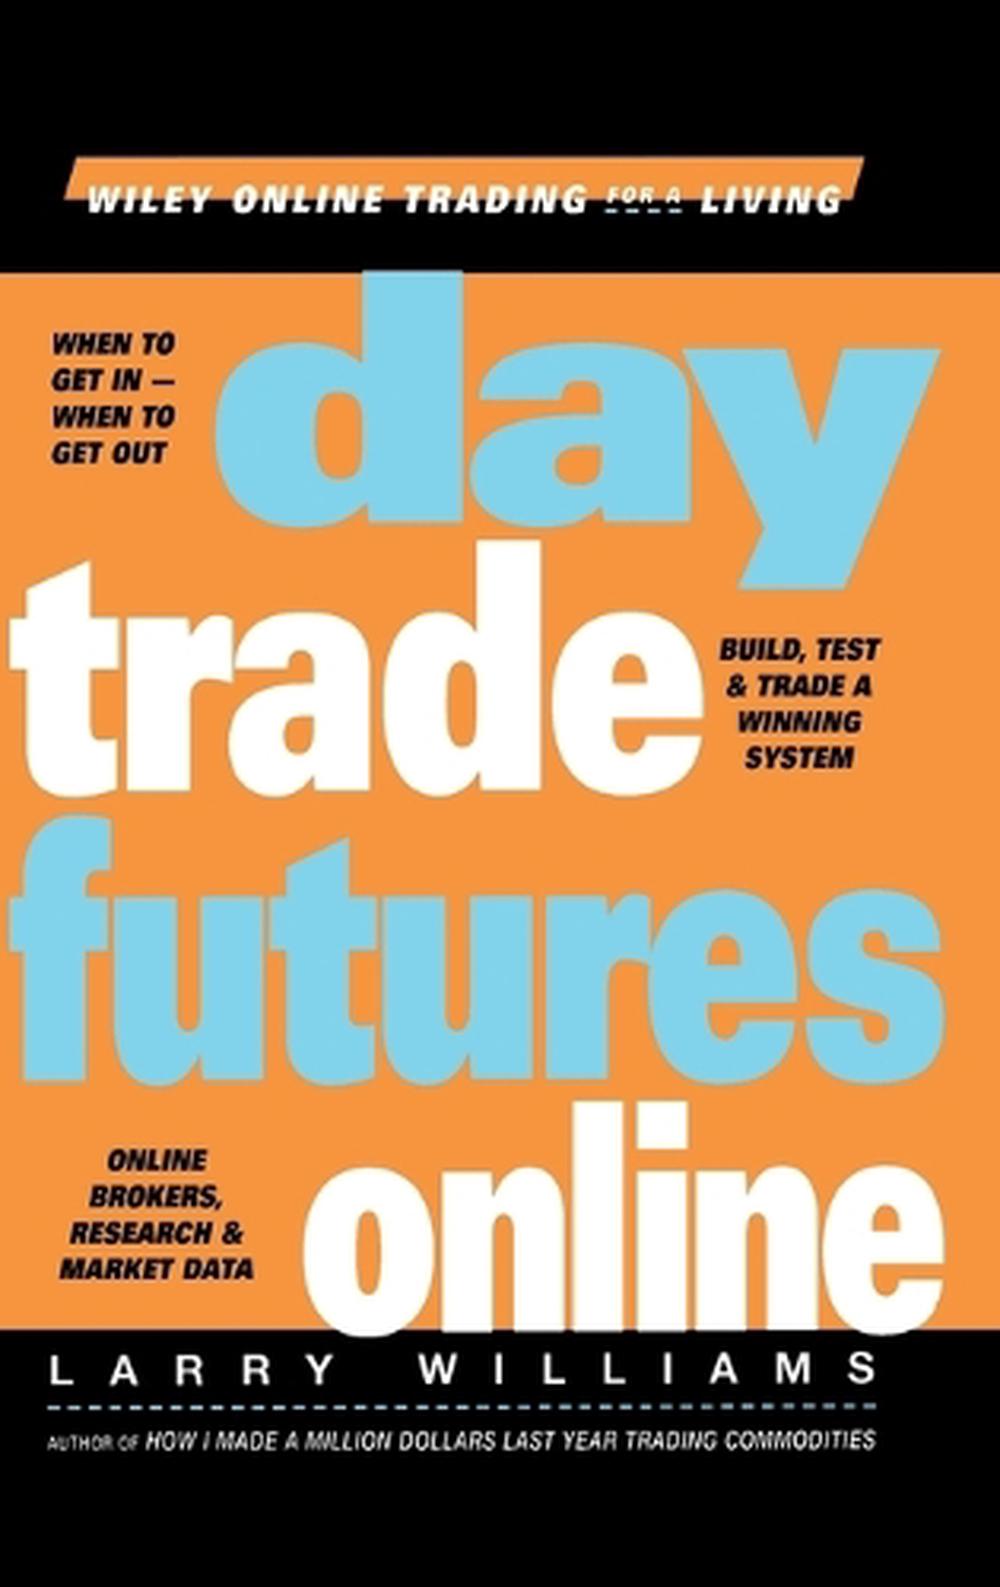 Day Trade Futures Online Build, Test and Trade a Winning System by Larry Willia eBay